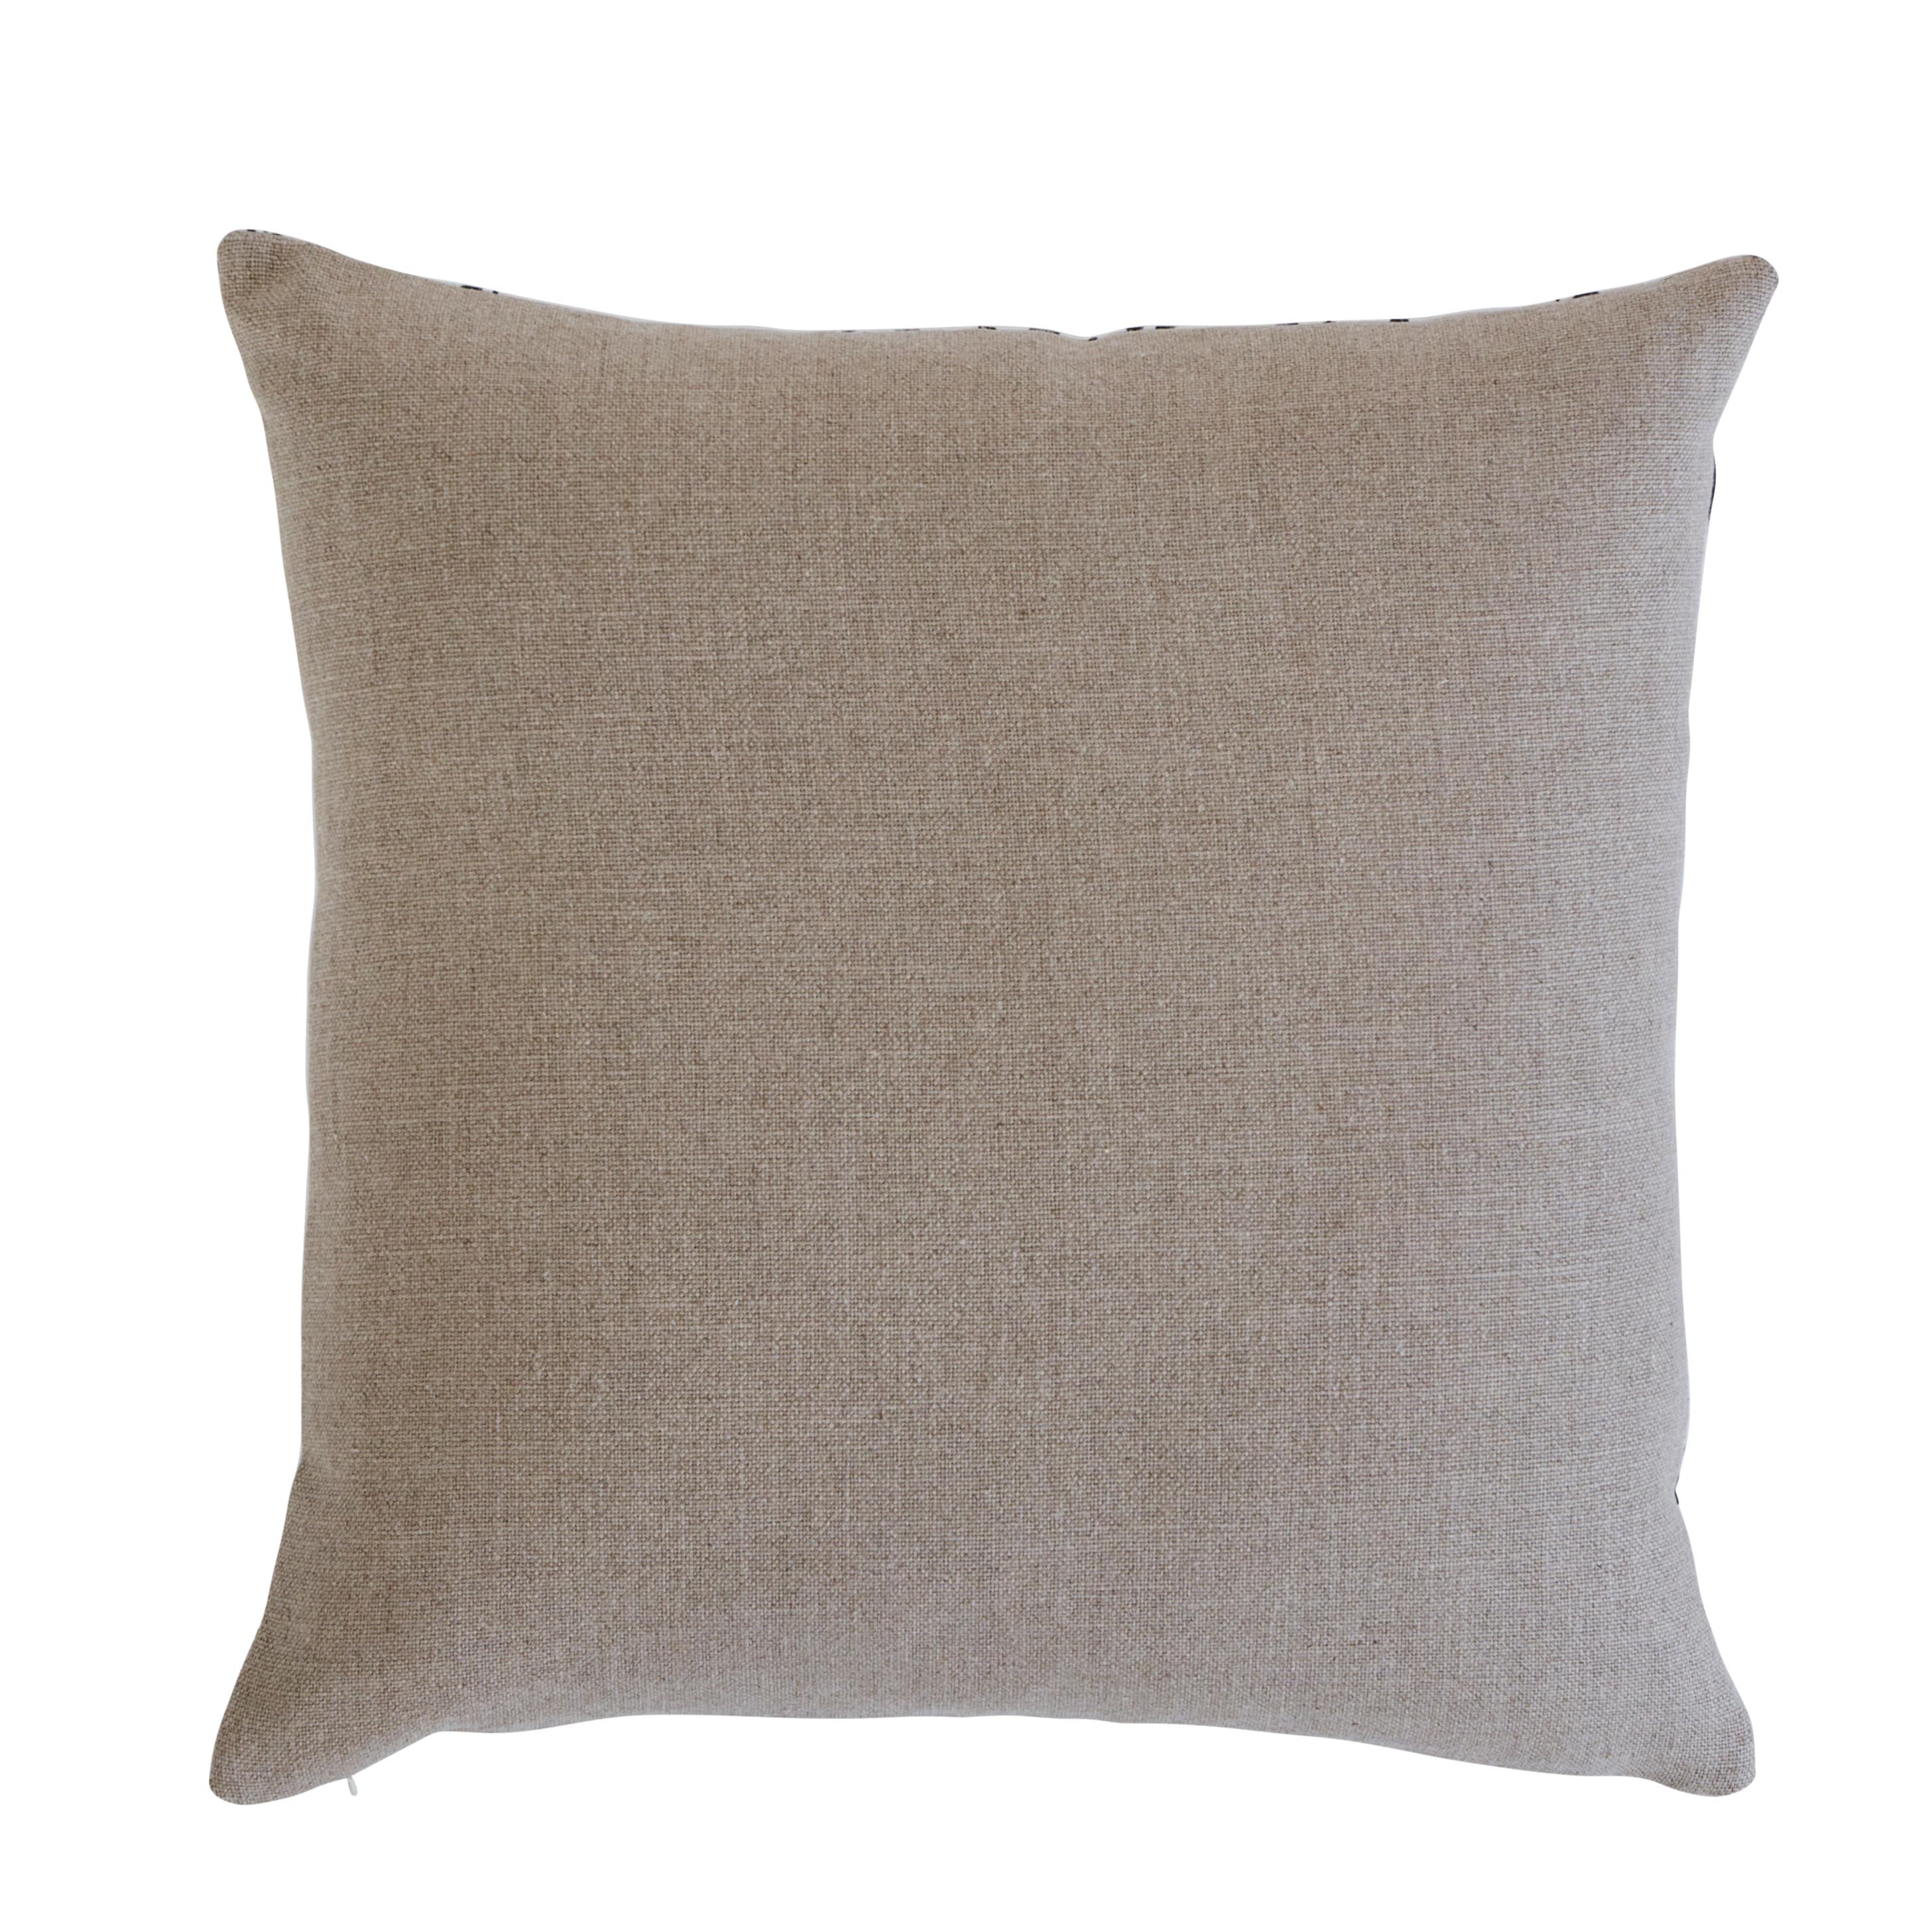 This pillow features Cynthia Embroidered Print with a knife edge finish. A hand printed botanical with hand embroidered details, this understated design features artful blossoms on a muslin-like ground. Back of pillow features Piet Performance